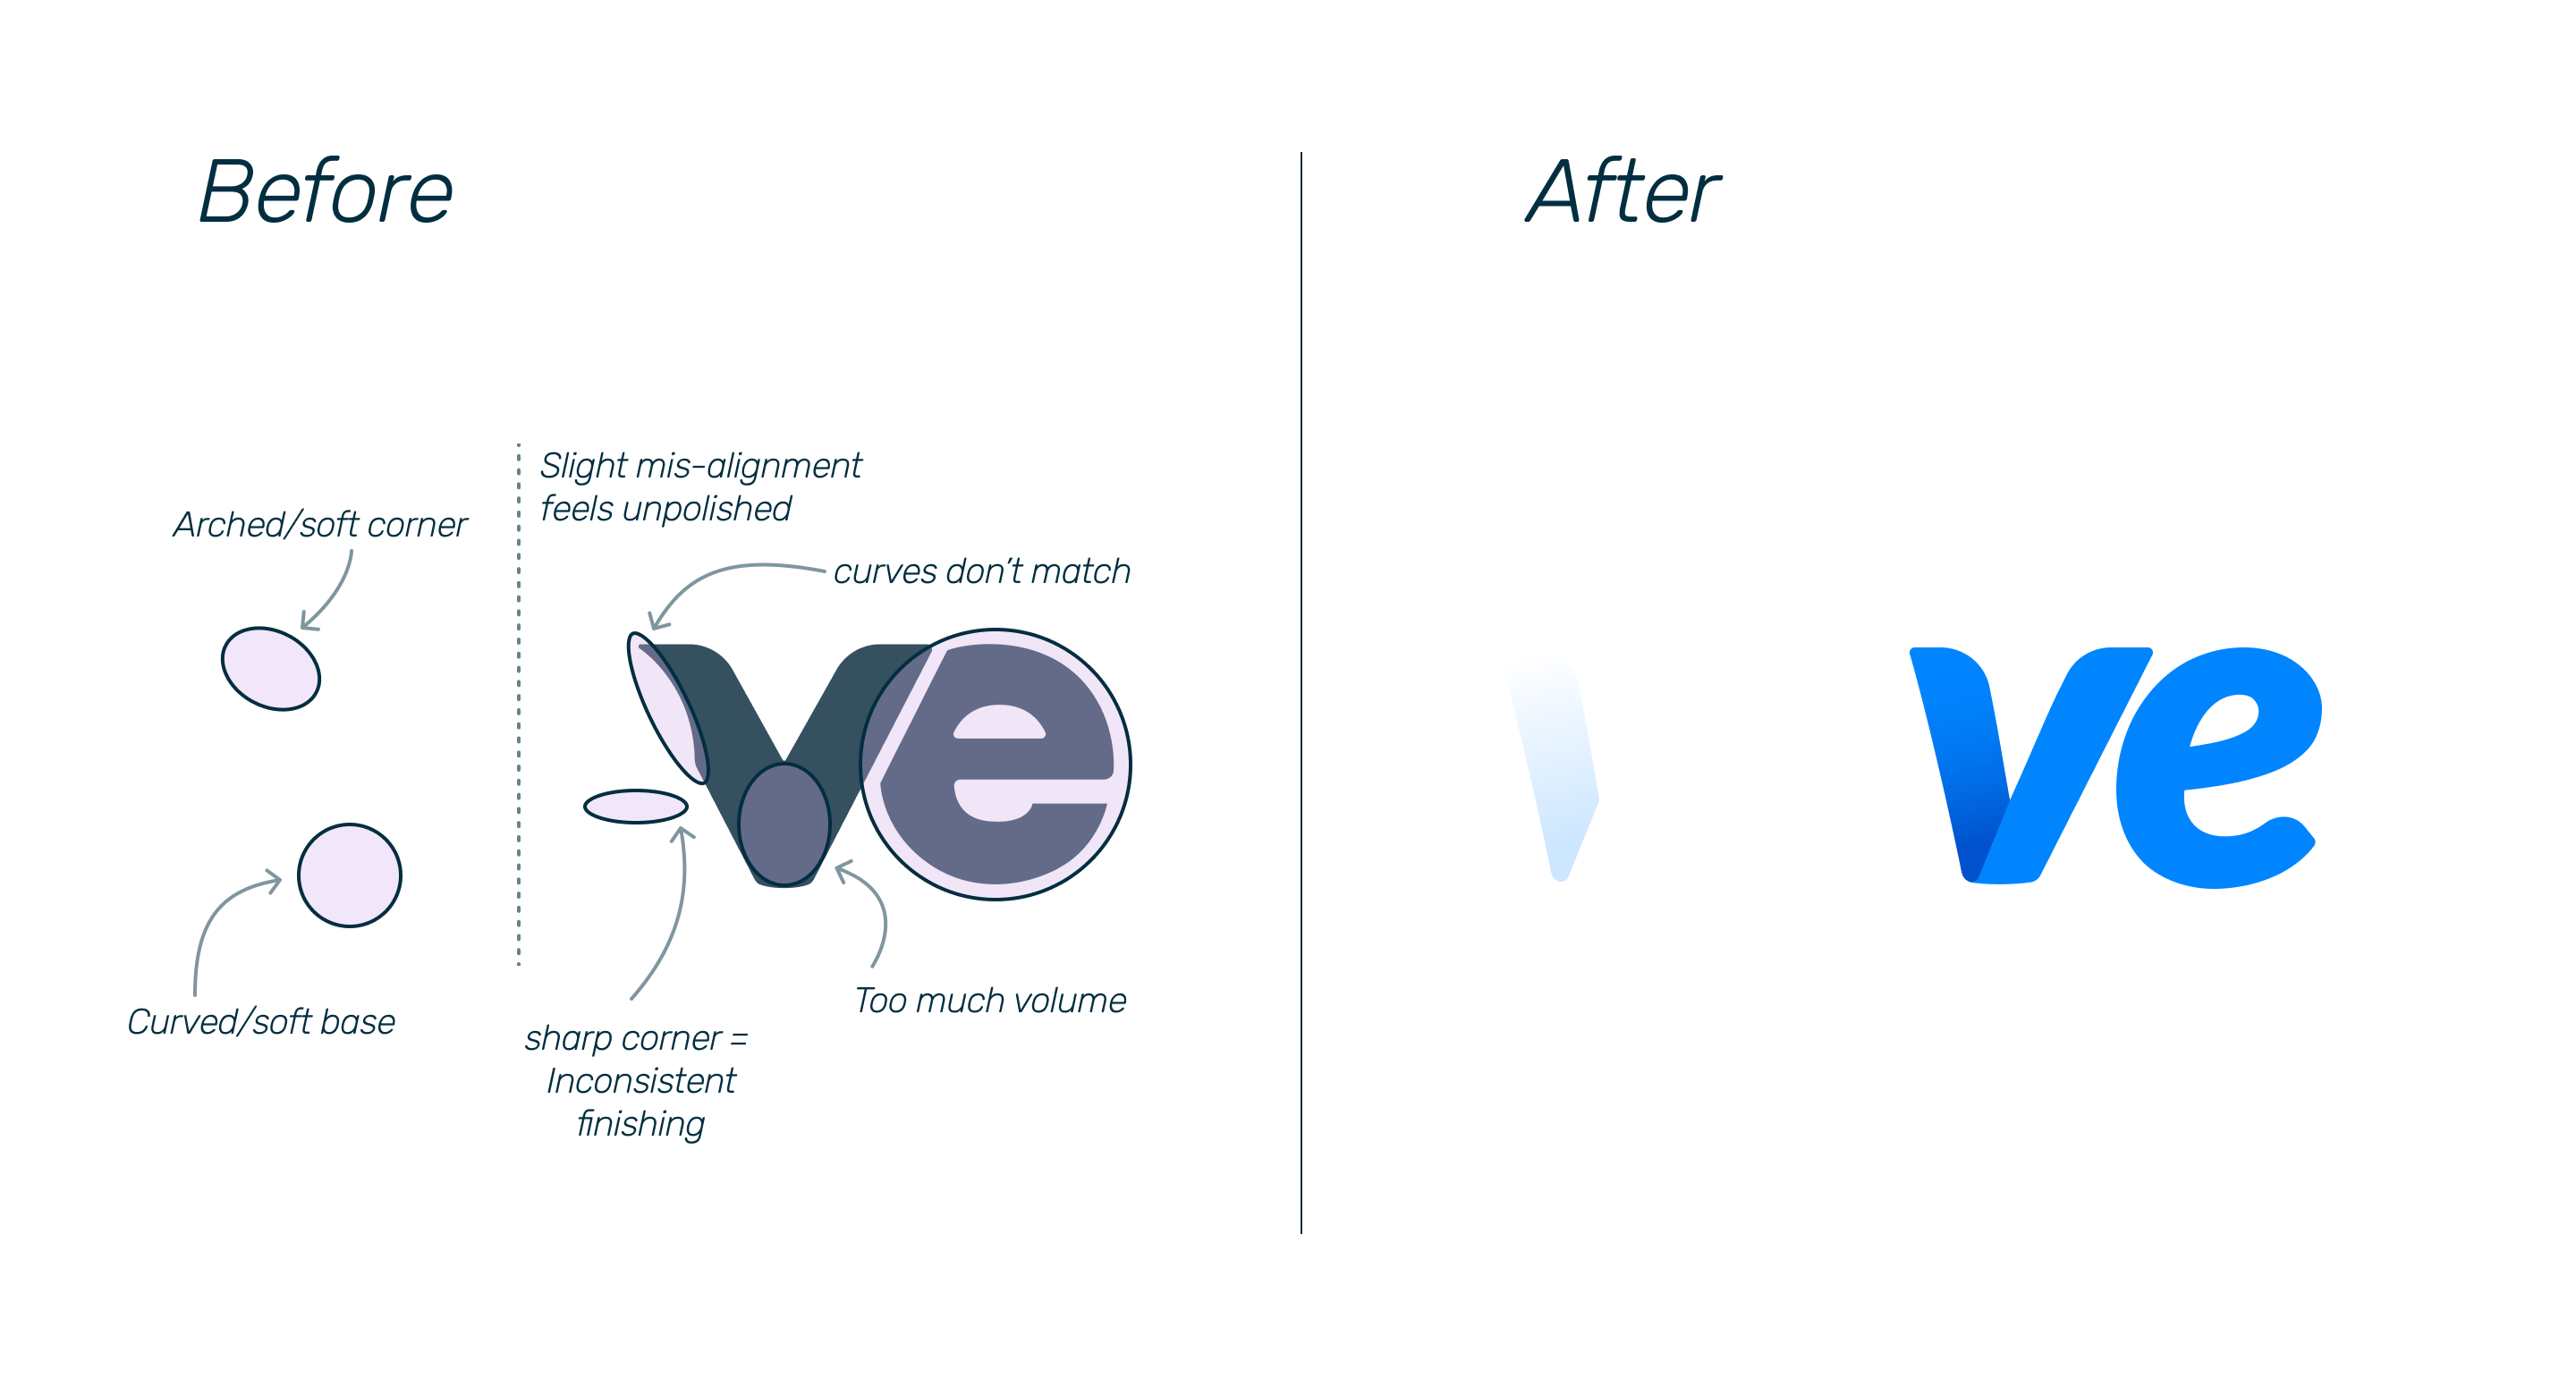 Detailed breakdown of the VeVe logo before and after redesign